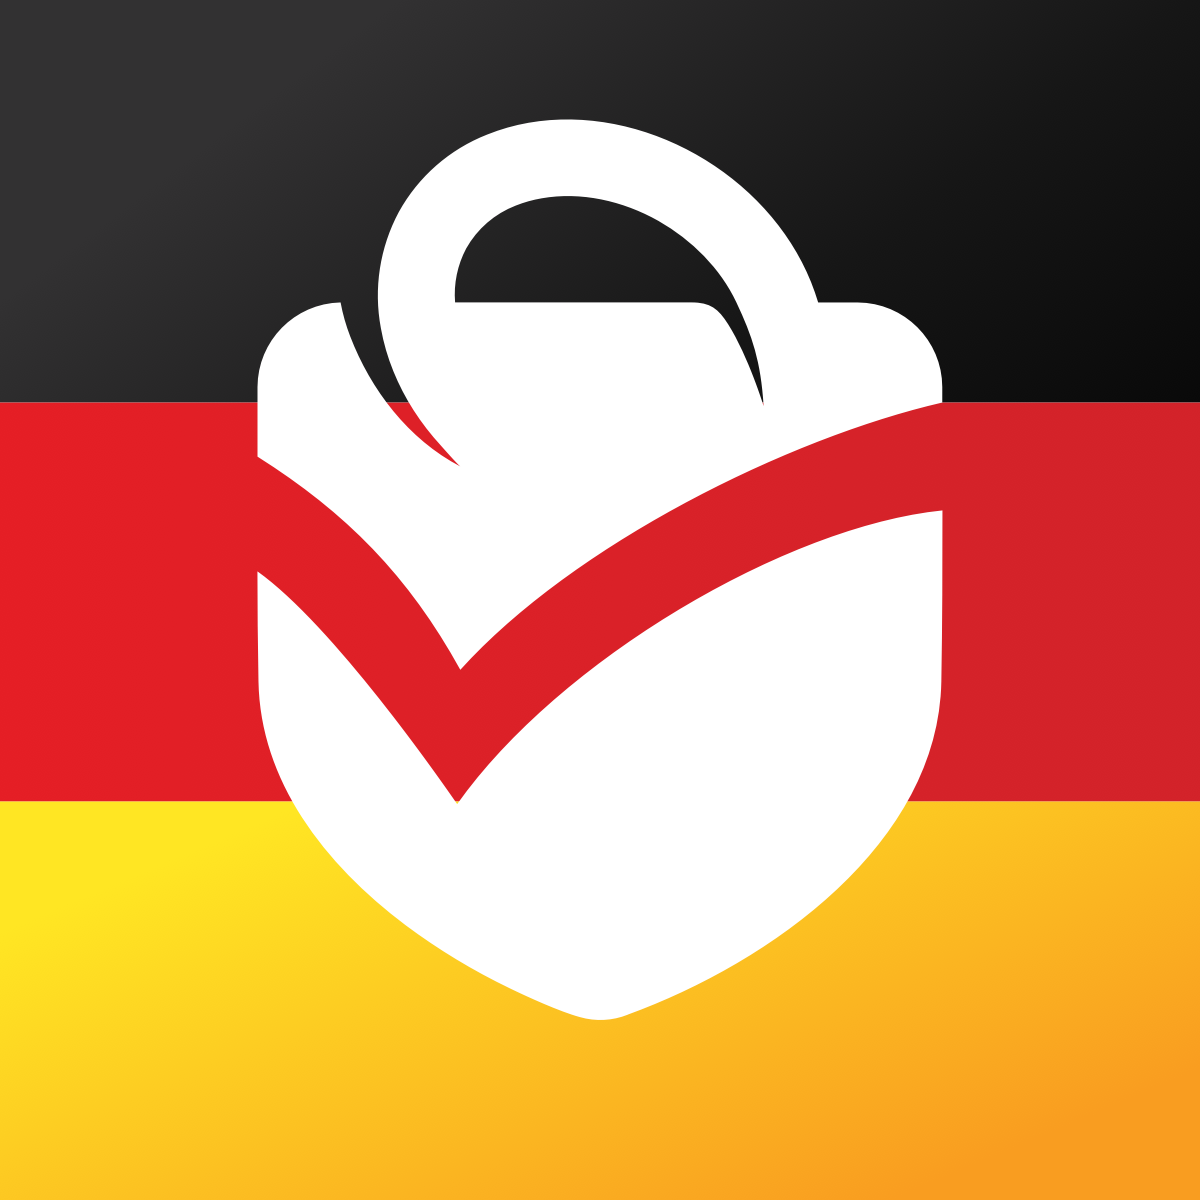 Hire Shopify Experts to integrate Legal Pro Germany app into a Shopify store